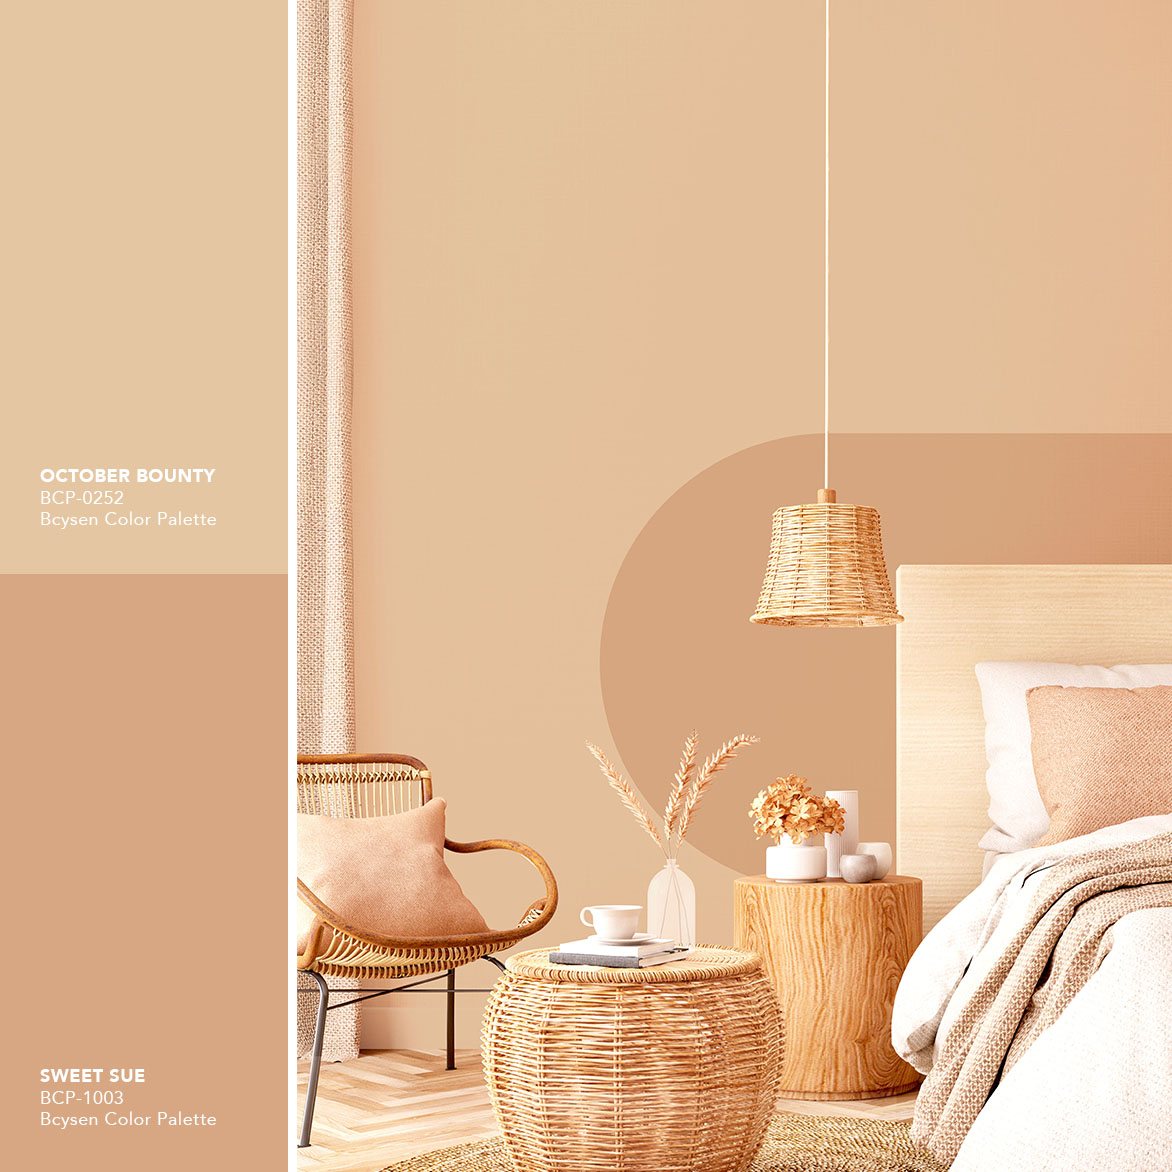 Different Paint Colors Offer You Different Looks for Your Interiors | MyBoysen